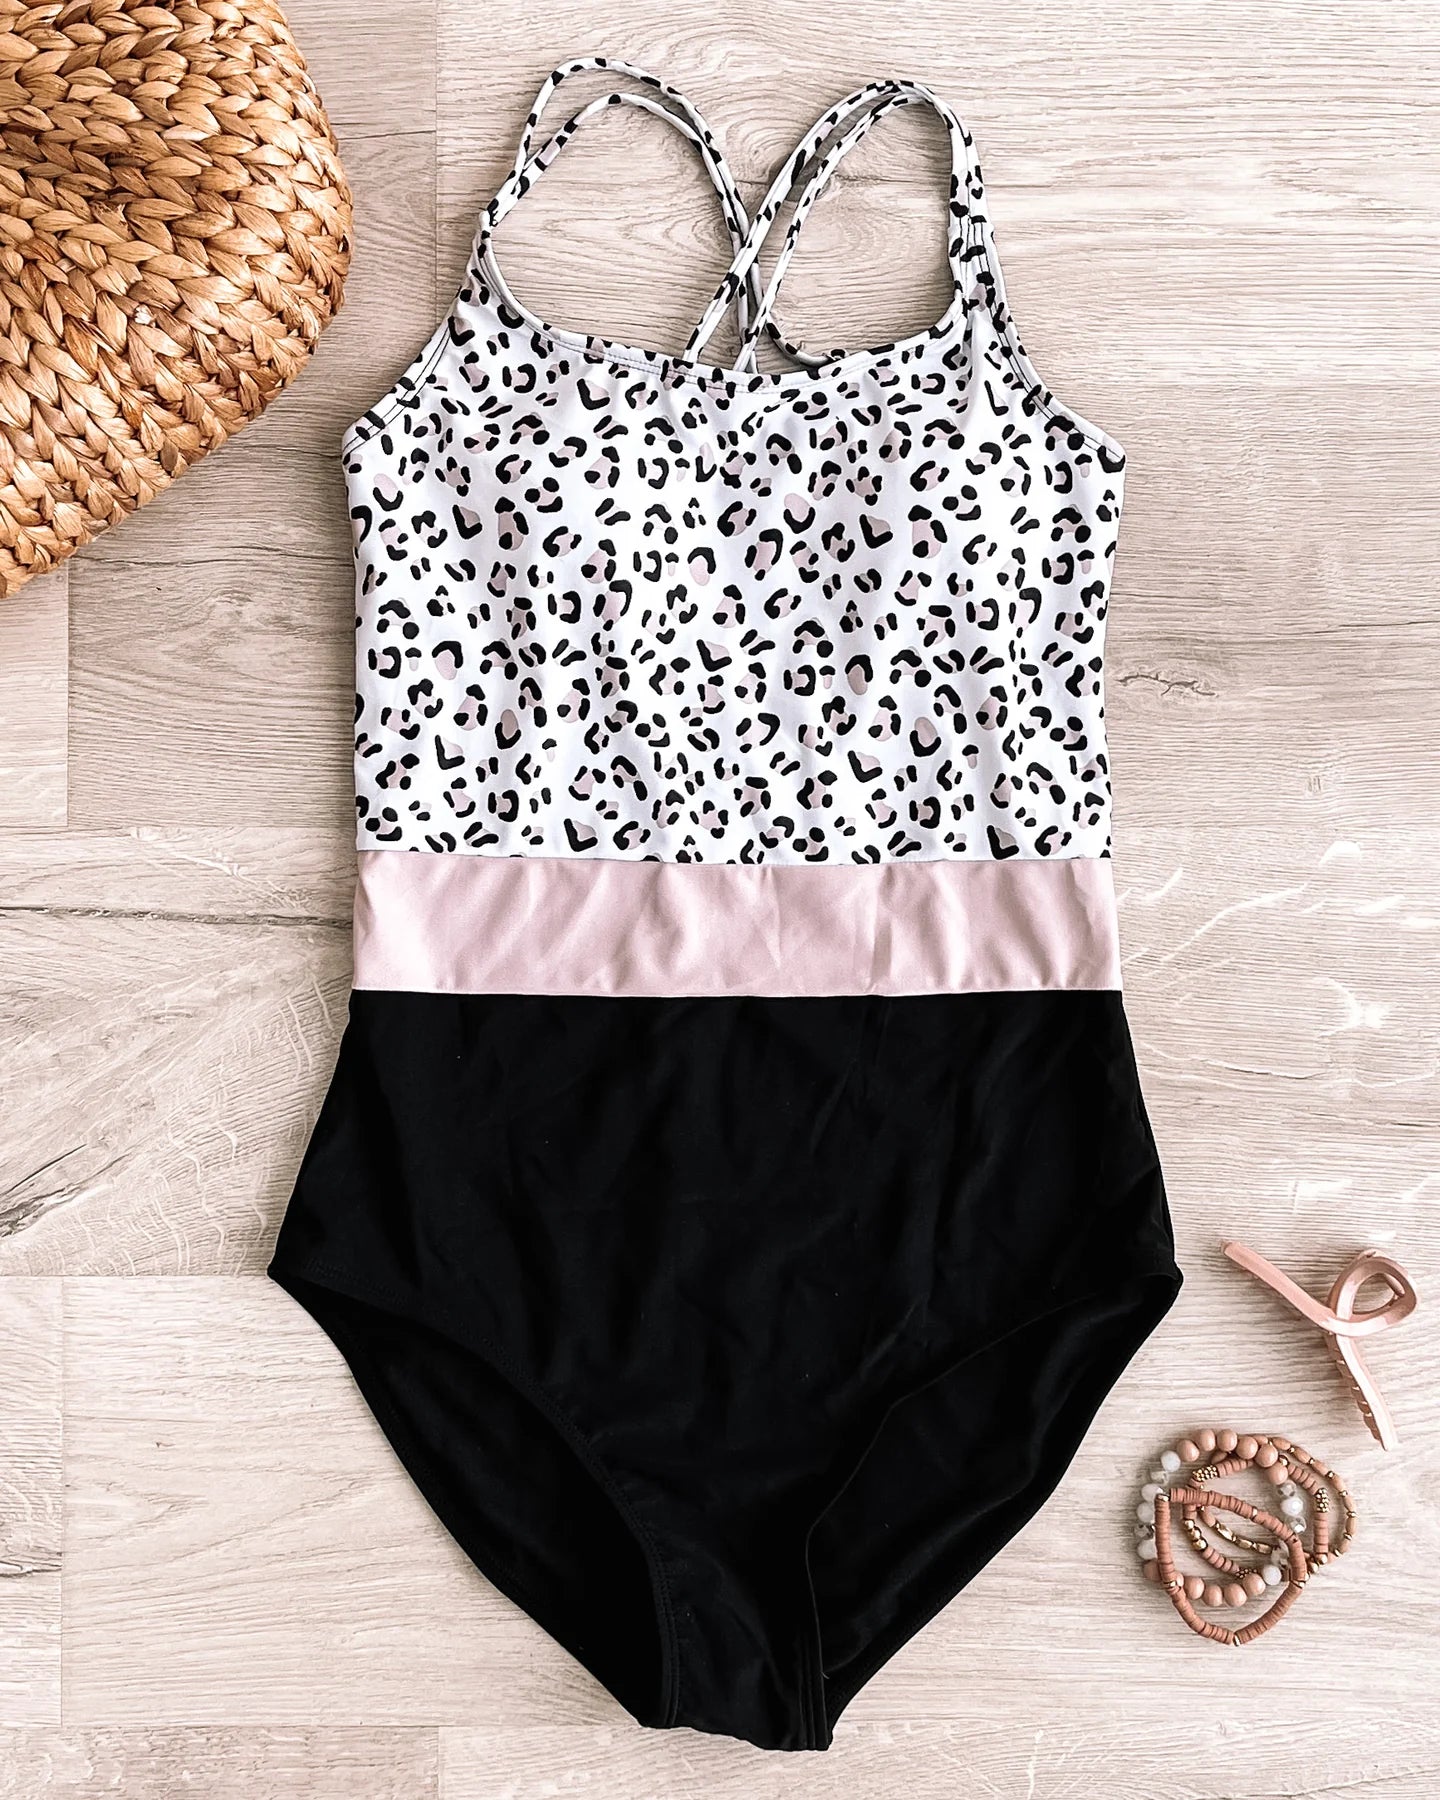 Ocean Outing One-Piece Swimsuit - Black & Leopard